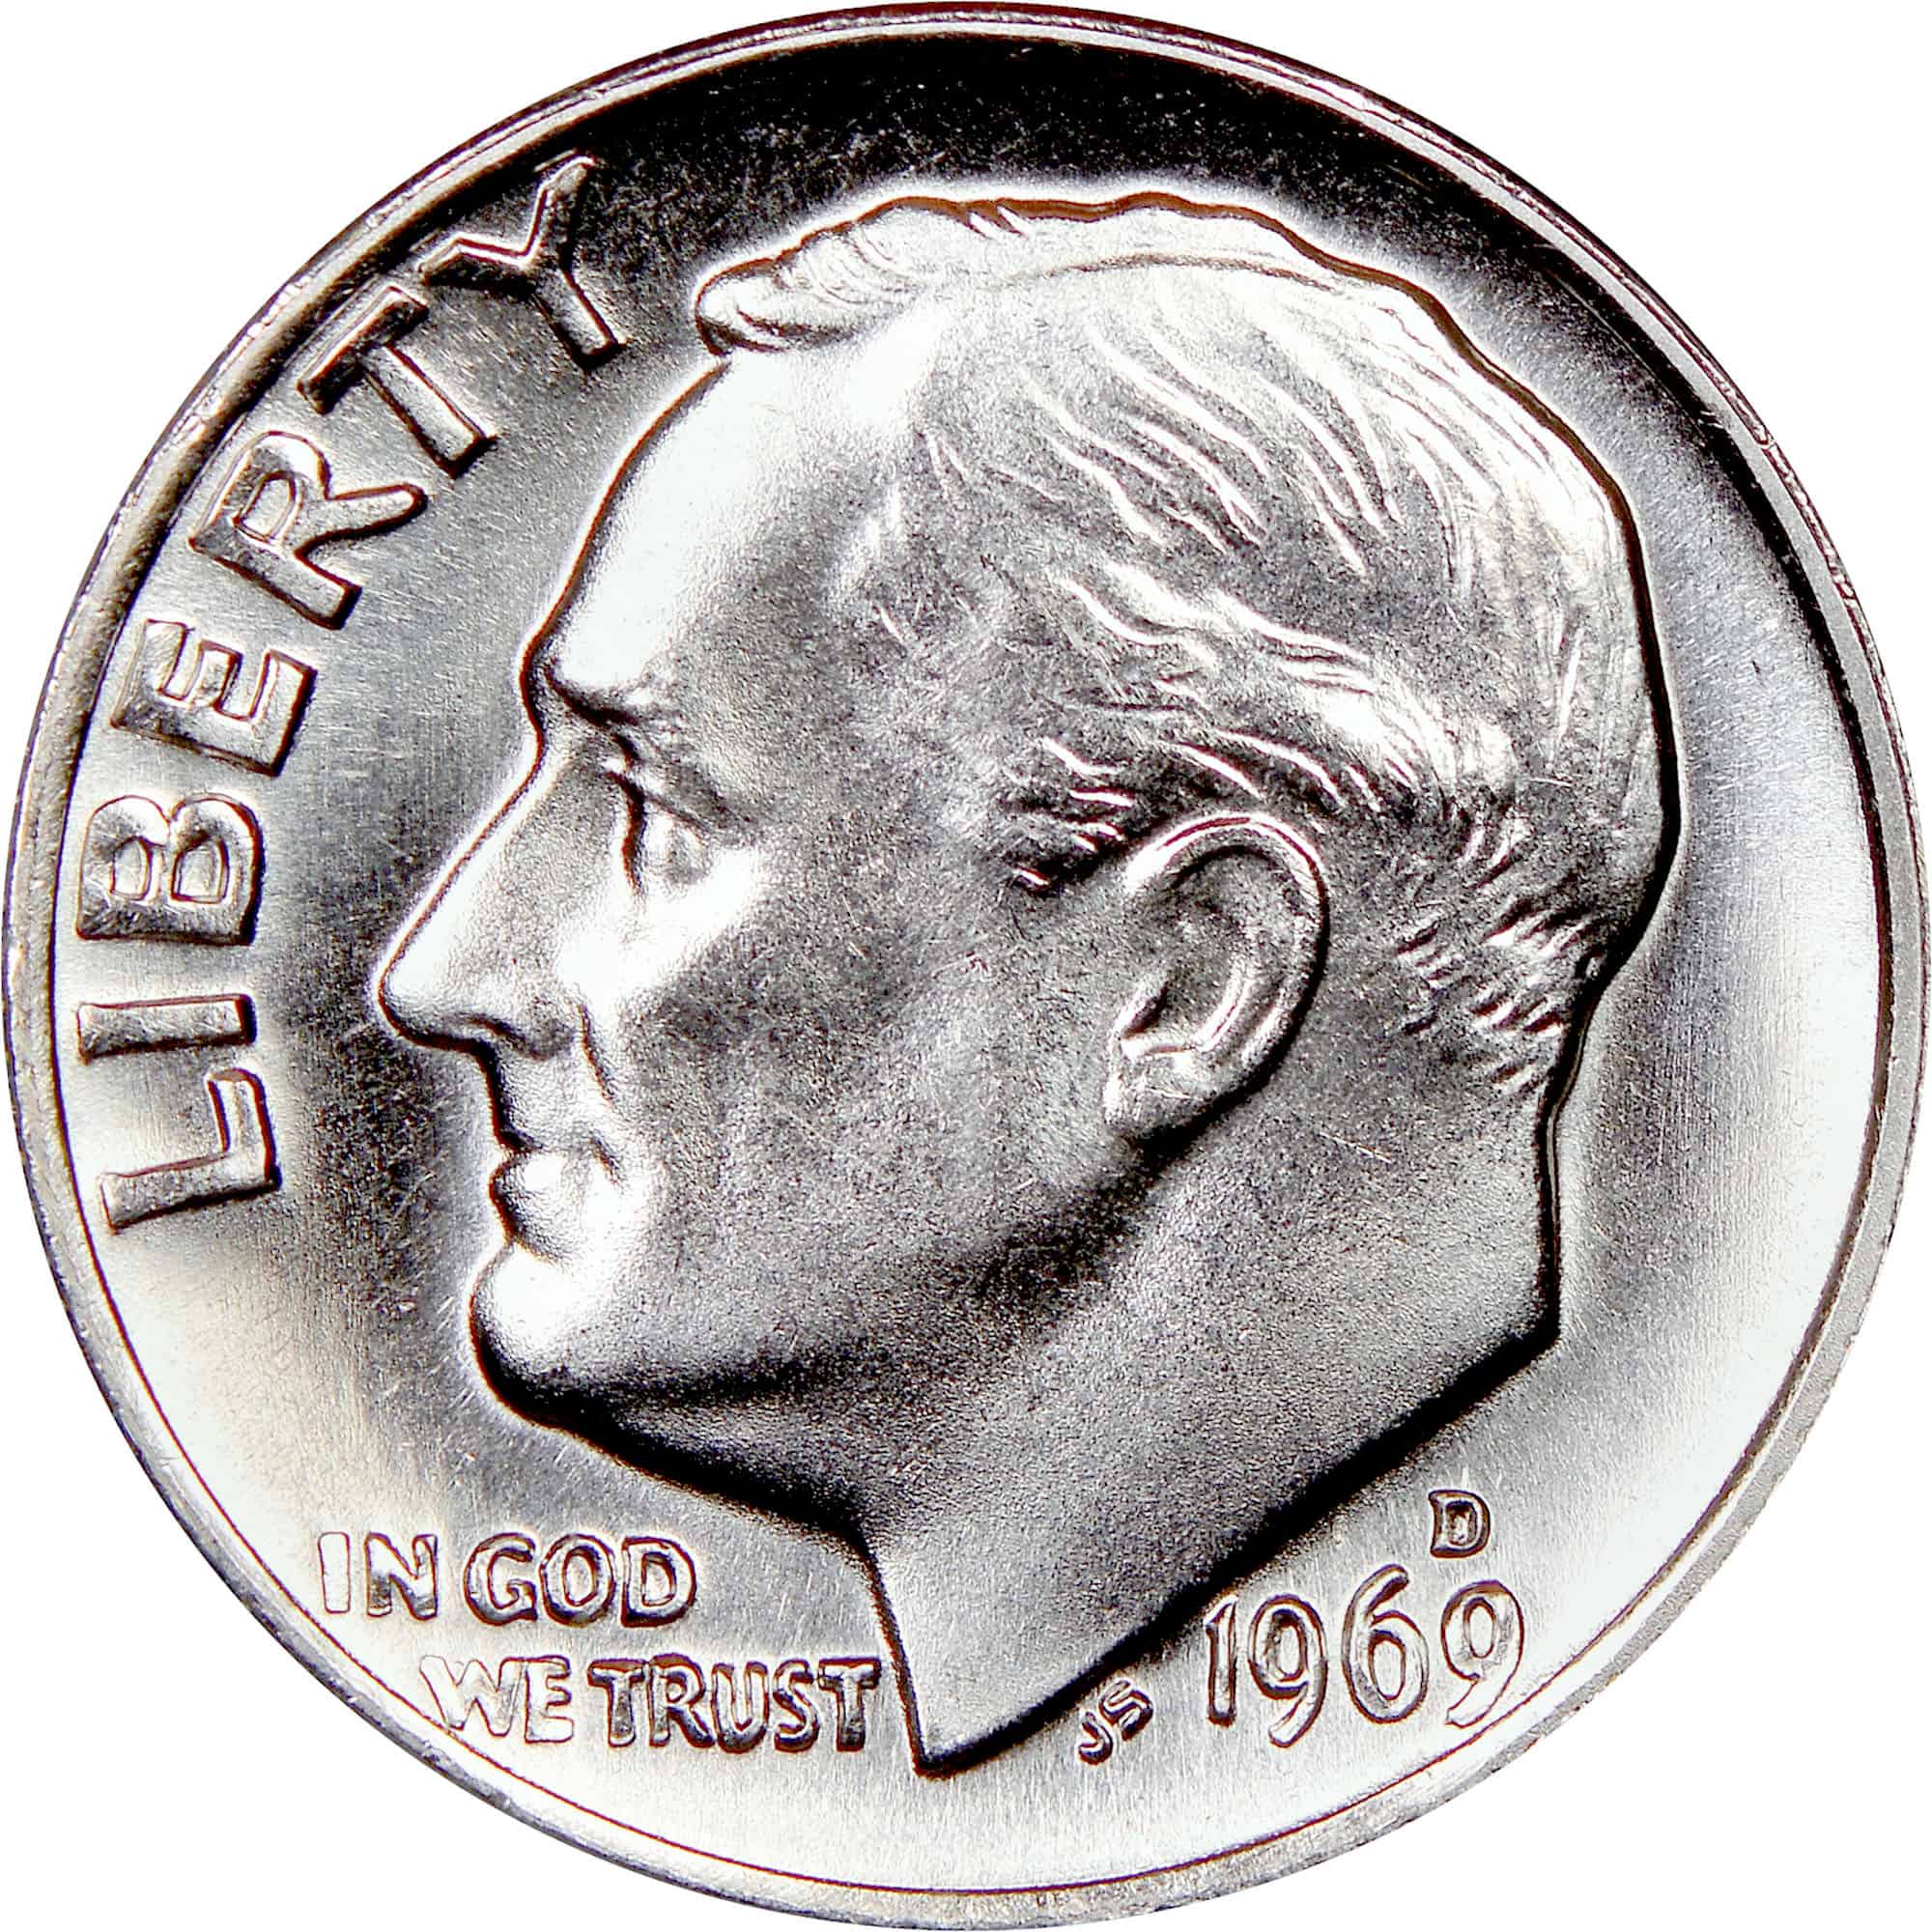 The obverse of the 1969 Roosevelt dime